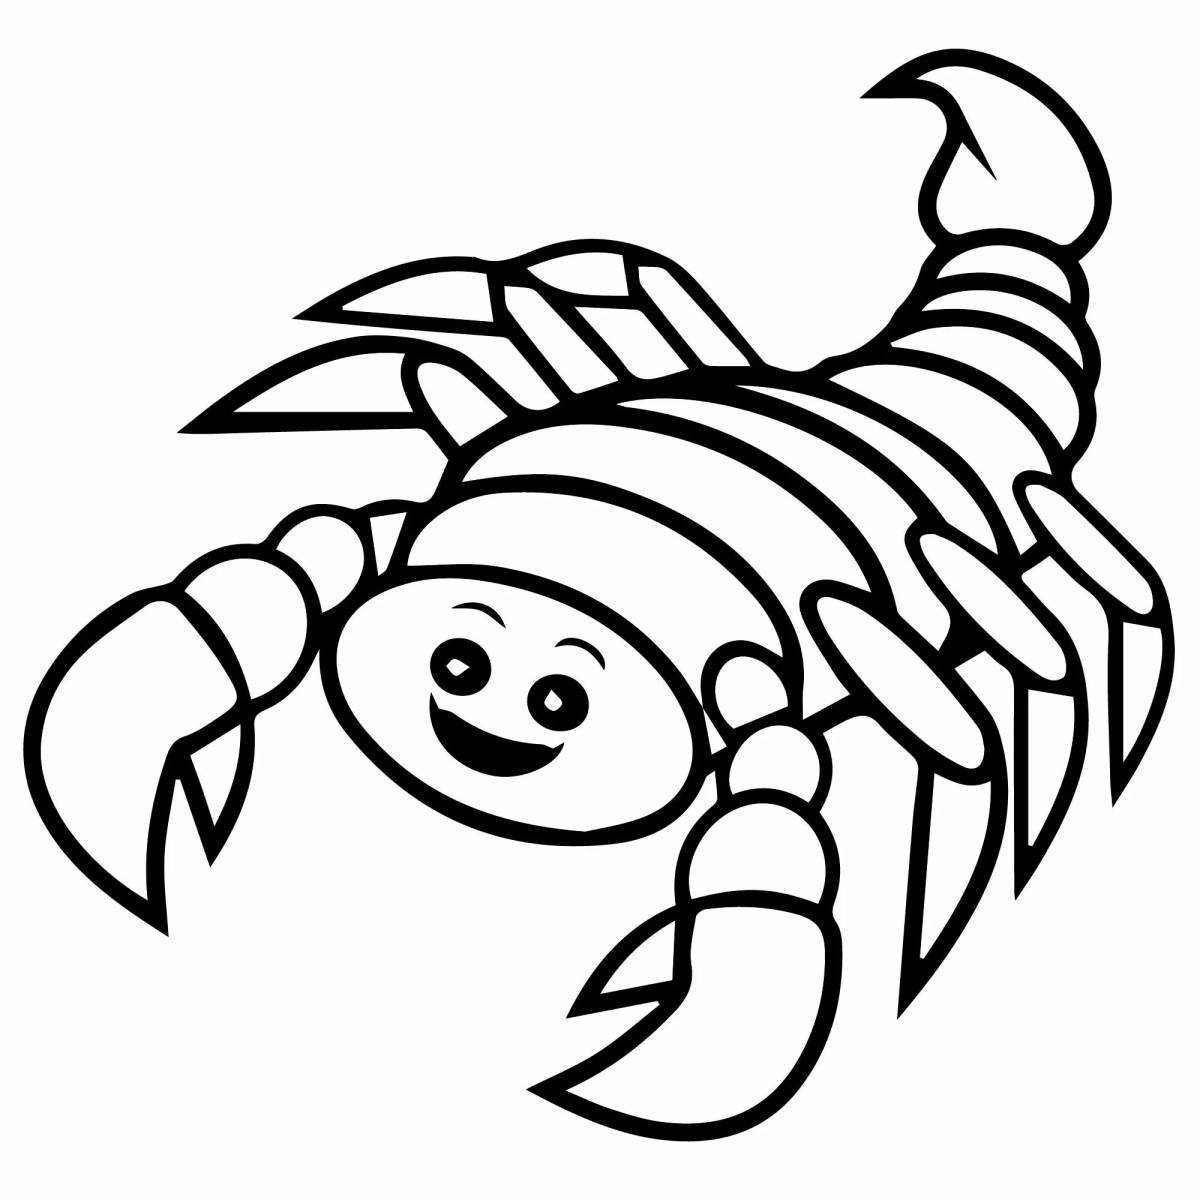 Coloring page cheeky scorpion